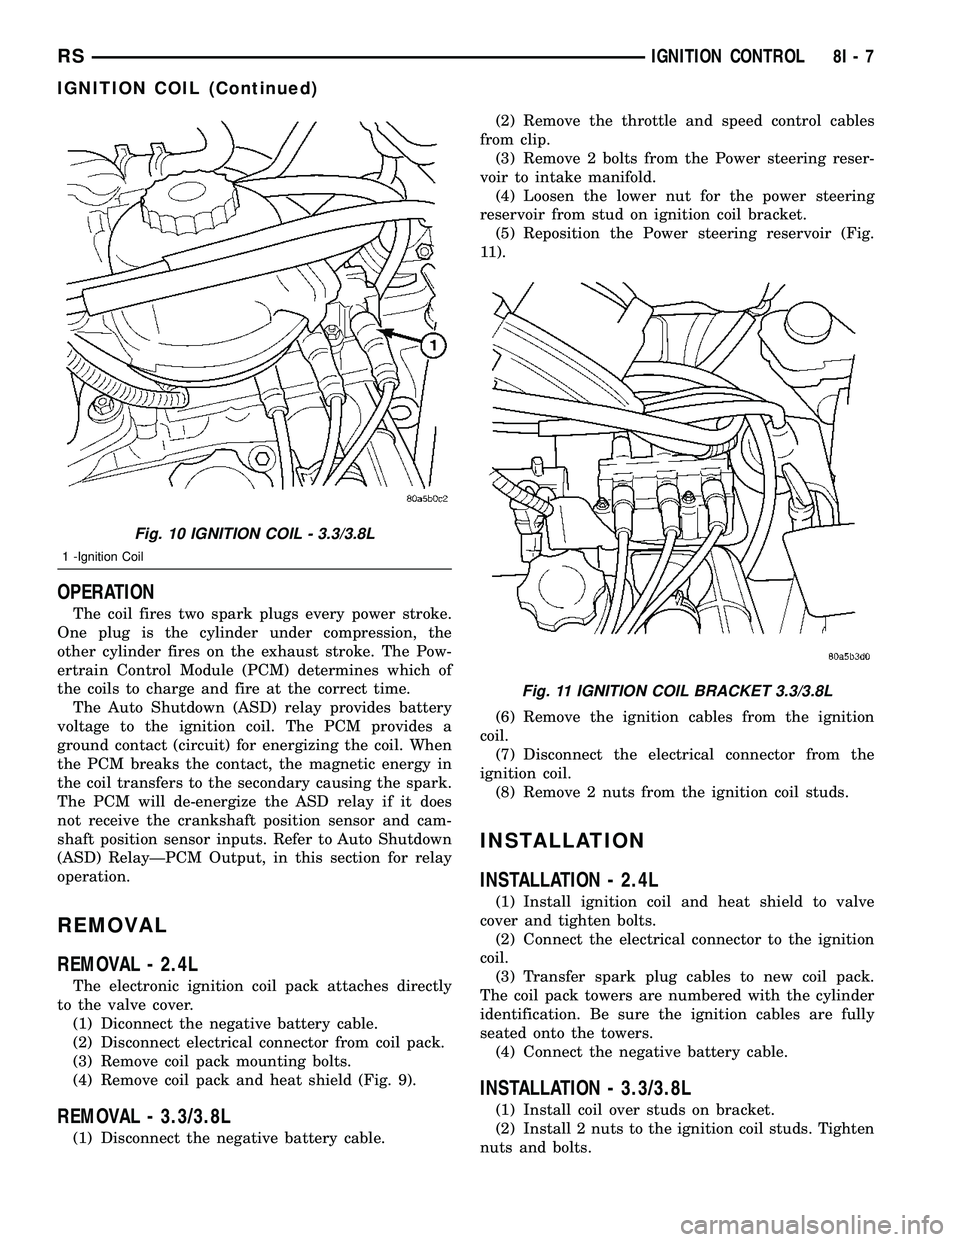 CHRYSLER VOYAGER 2004  Service Manual OPERATION
The coil fires two spark plugs every power stroke.
One plug is the cylinder under compression, the
other cylinder fires on the exhaust stroke. The Pow-
ertrain Control Module (PCM) determine